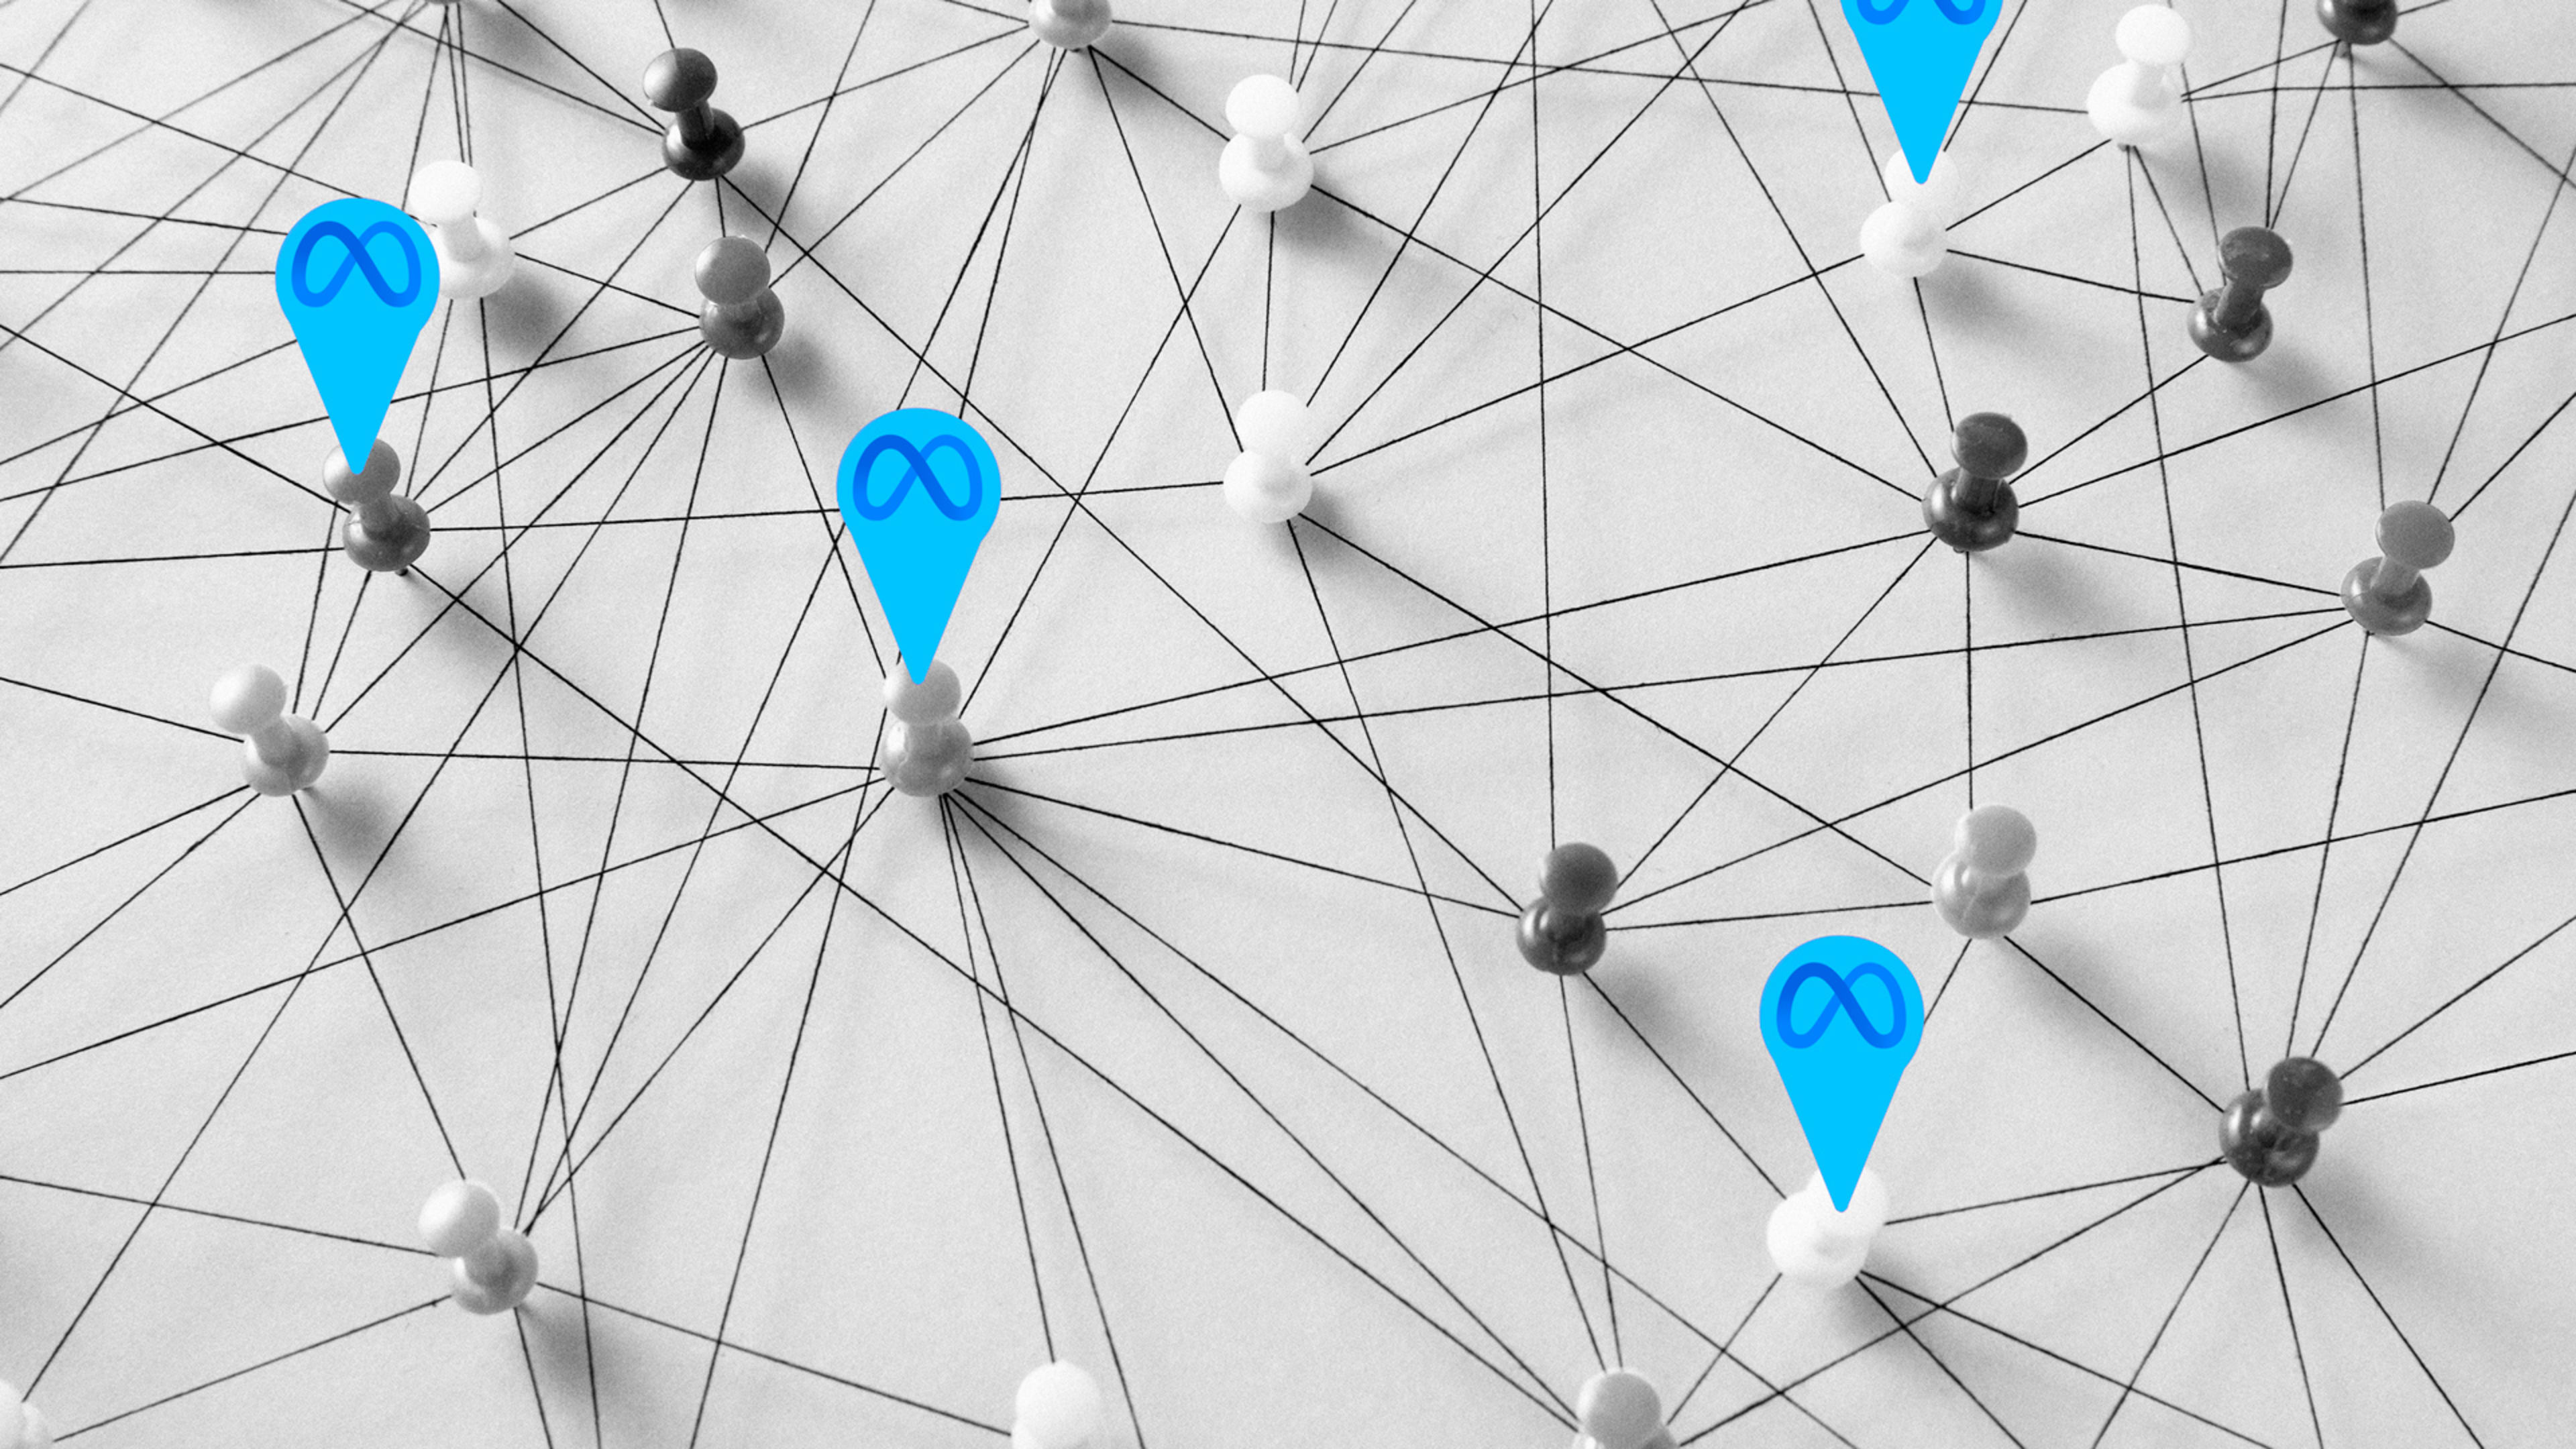 Facebook will soon stop tracking your location and delete your location history